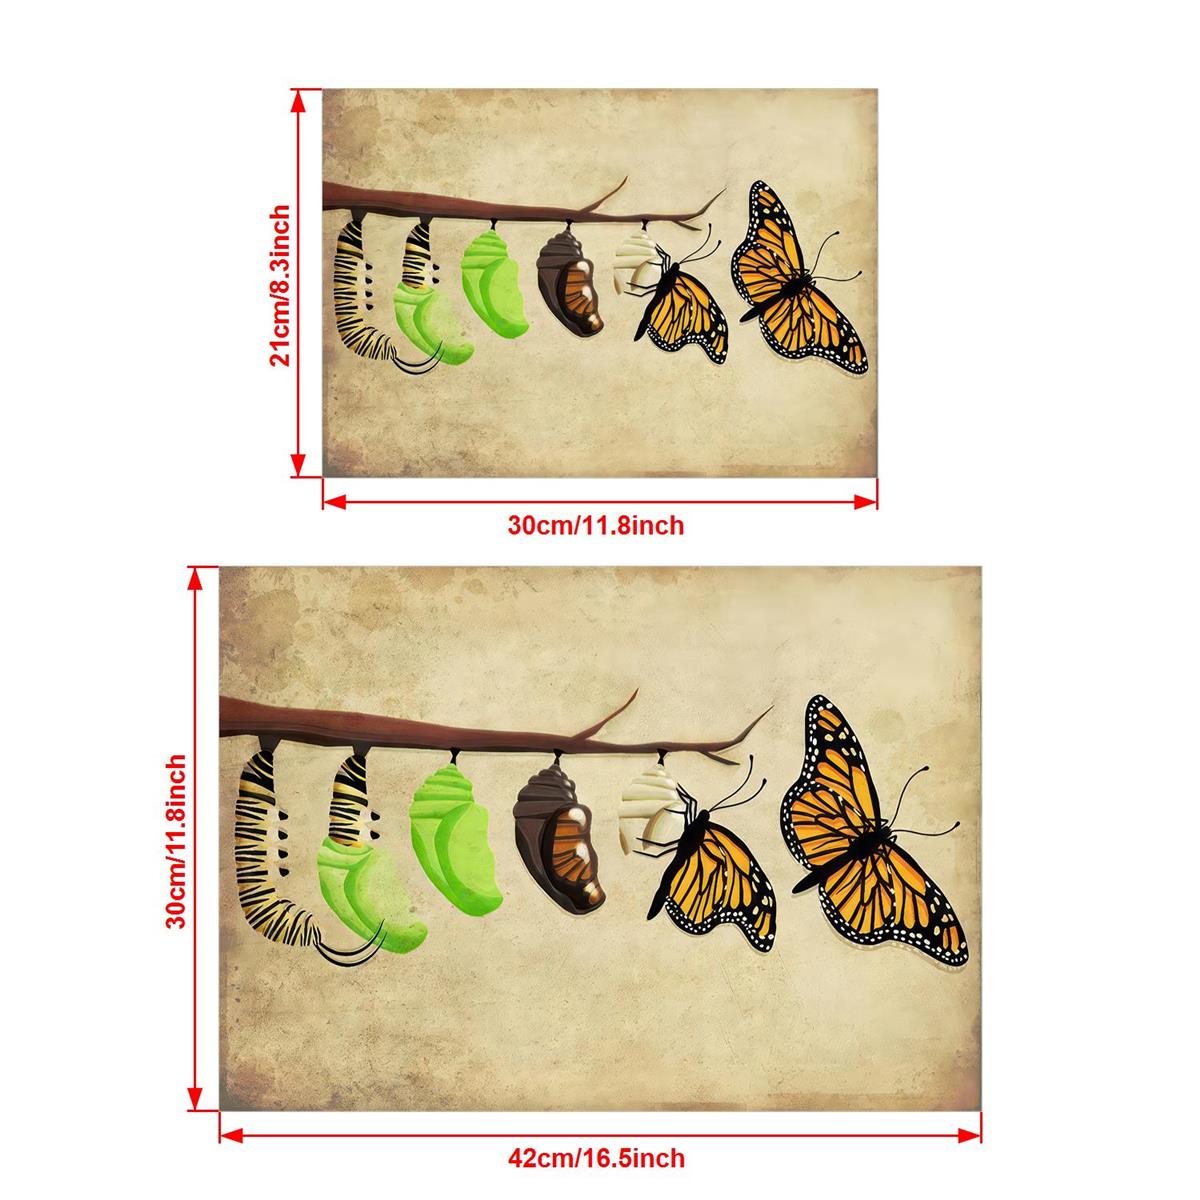 The Life Cycle of the Monarch Butterfly Poster II